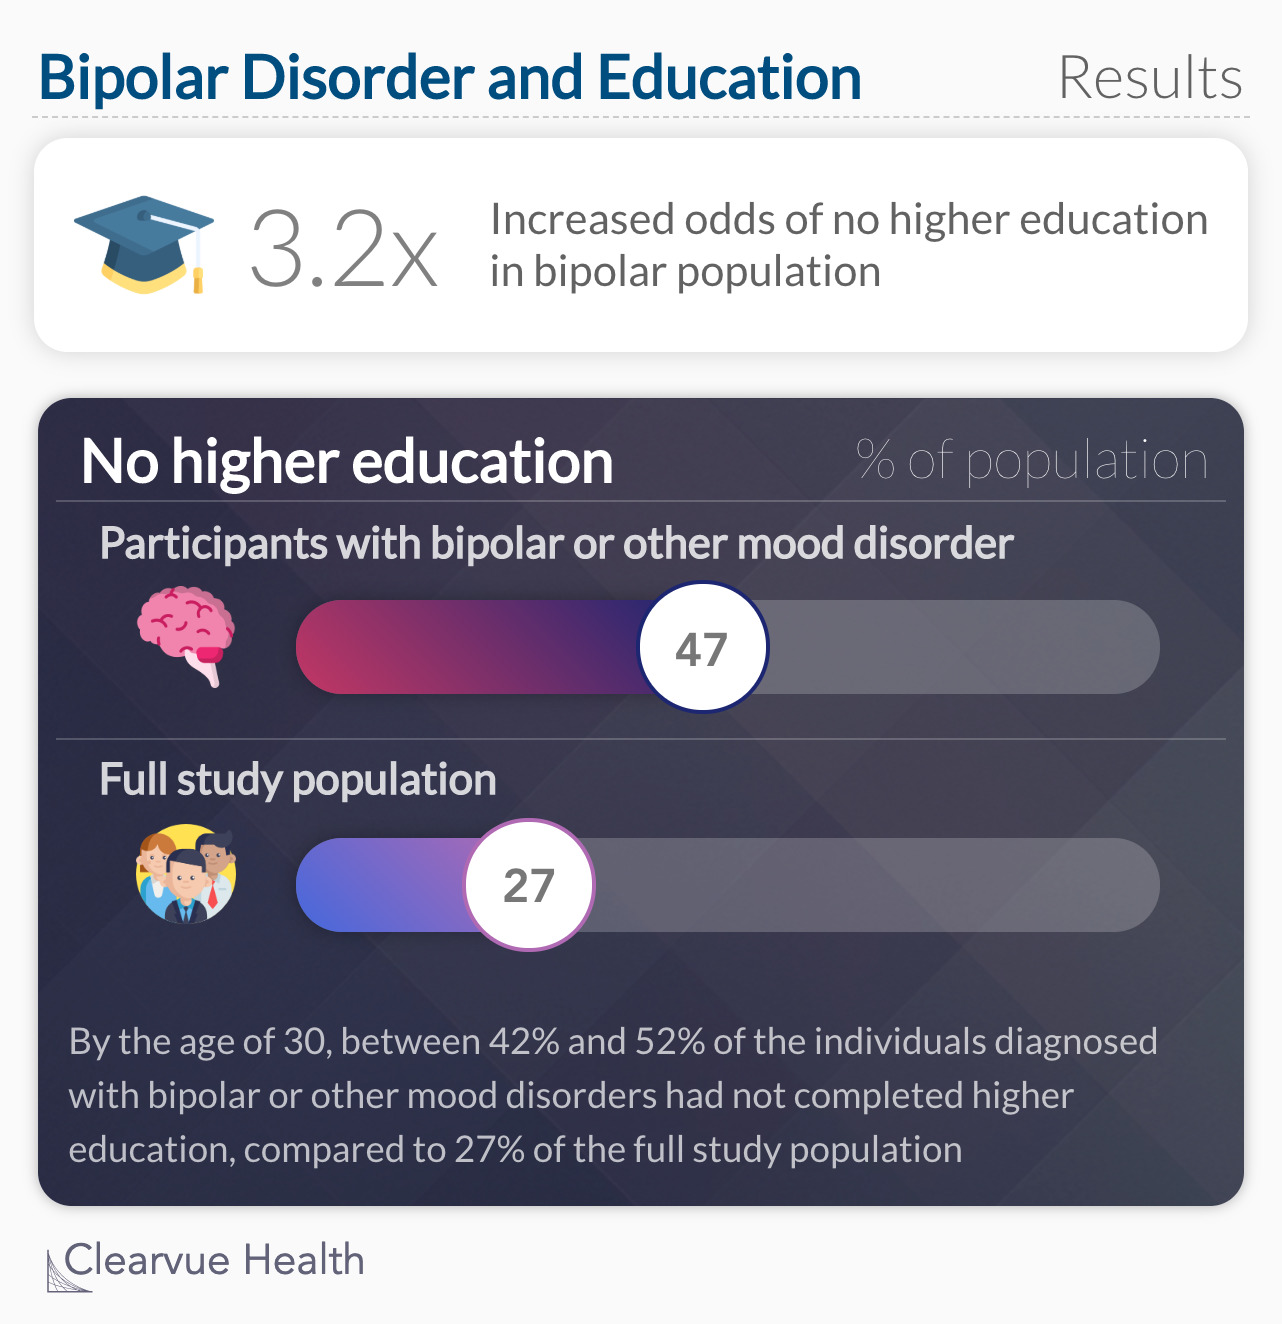 Bipolar Disorder and Education: Study Results